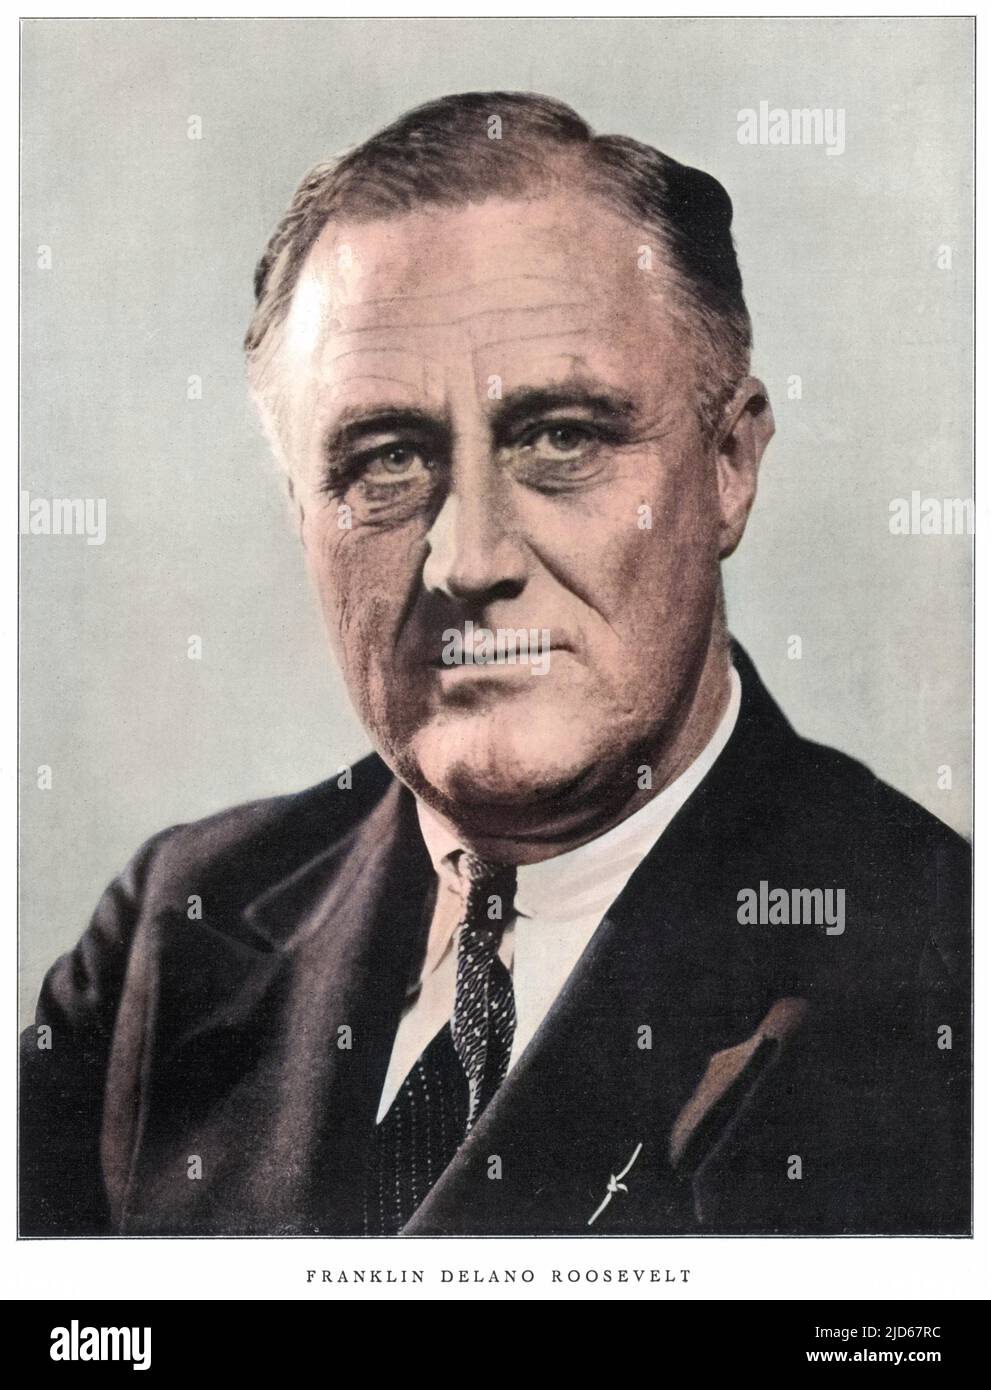 FRANKLIN DELANO ROOSEVELT 32nd President of the USA in the year of his election Colourised version of : 10031078       Date: 1882 - 1945 Stock Photo